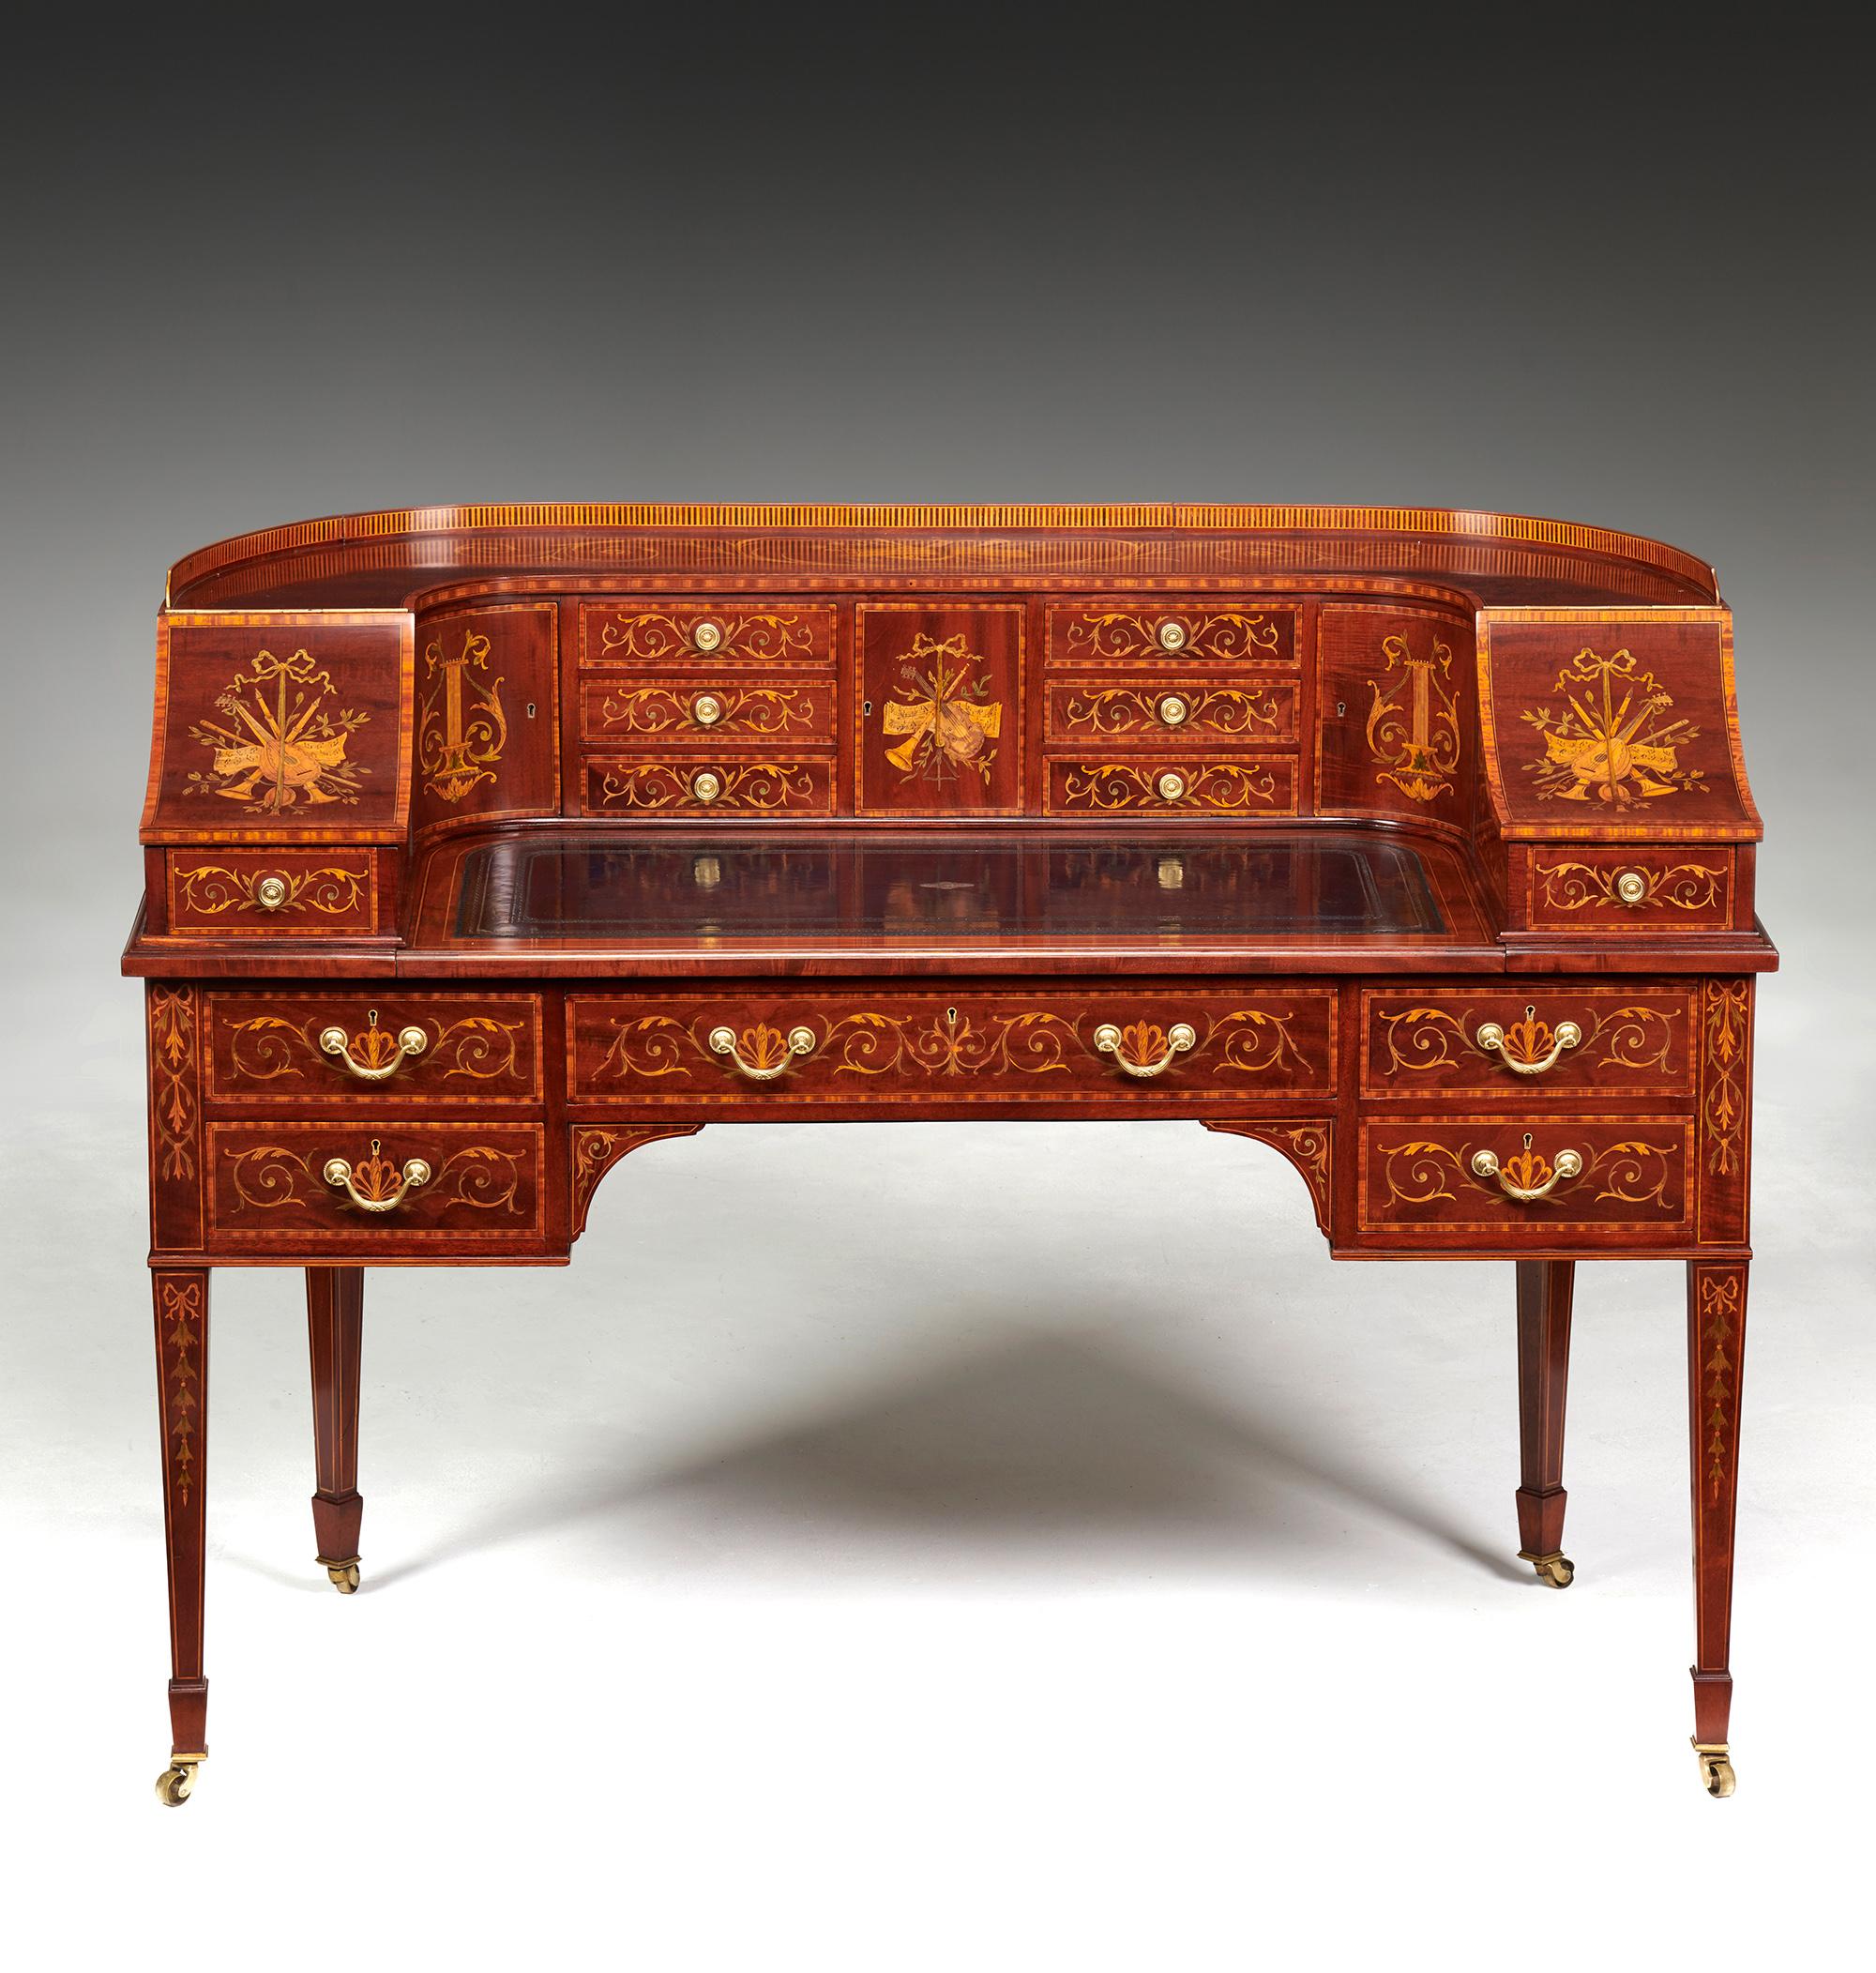 English Maple & Co. Mahogany Satinwood and Marquetry Inlaid Victorian Carlton House Desk